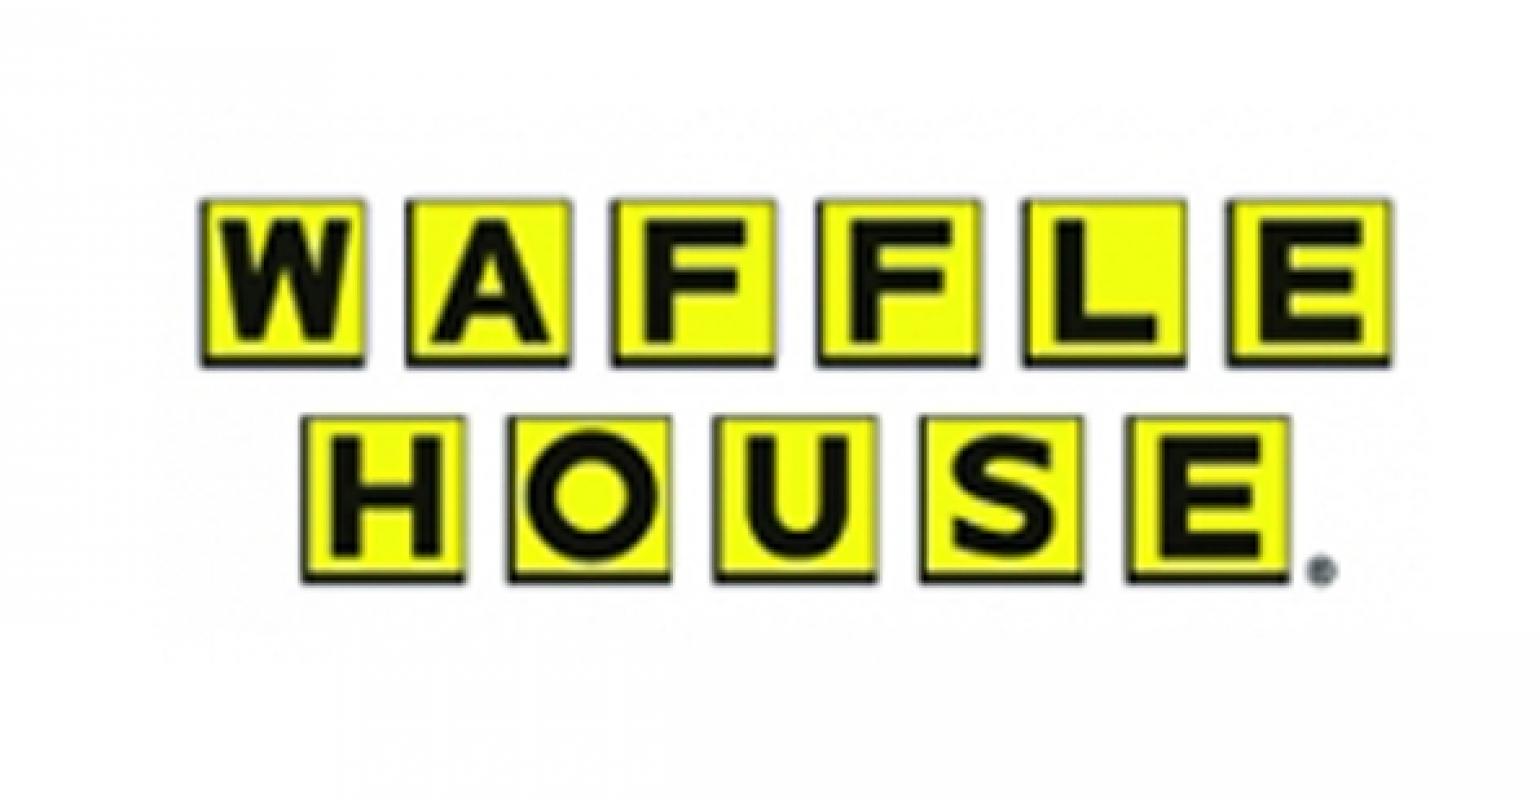 Waffle House Inc Chief Executive Denies Sexual Harassment Claims